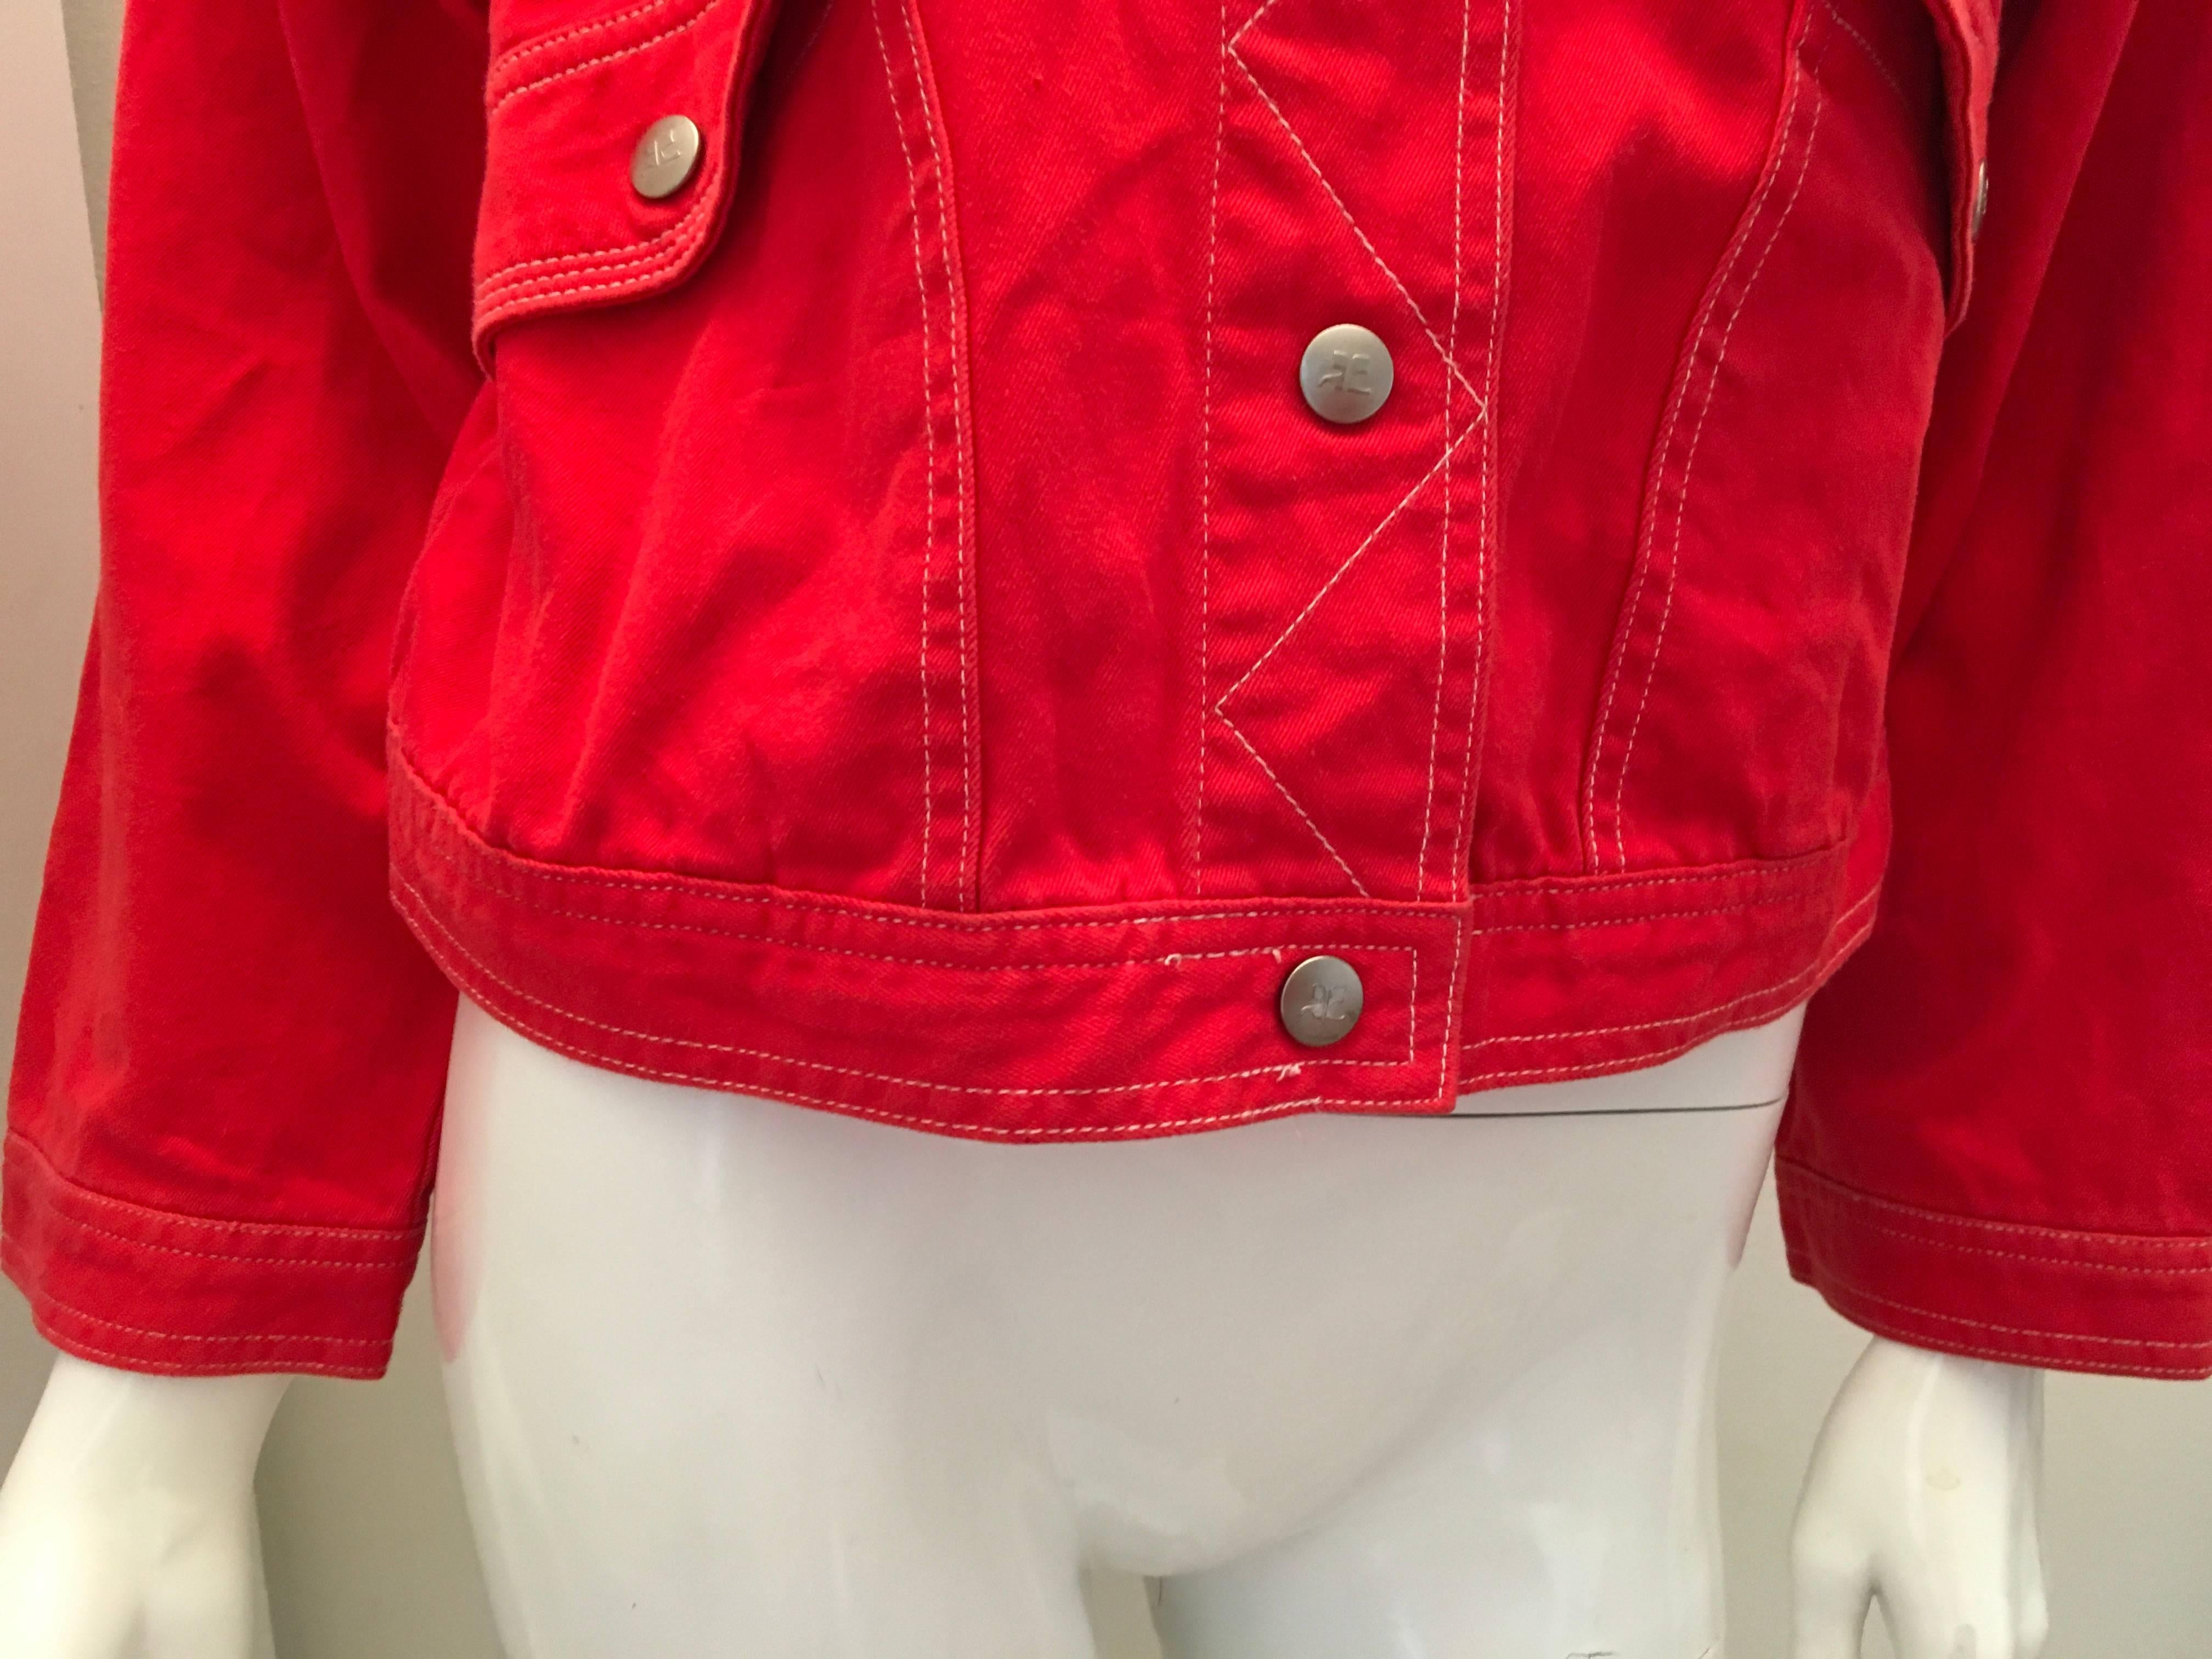 Presented here is a beautiful jacket from Courreges. This great jacket is made from 100% red cotton fabric and is constructed with white thread for a nice color contrast in the design. The jacket fits like a size 4 to a size 6, but please pay